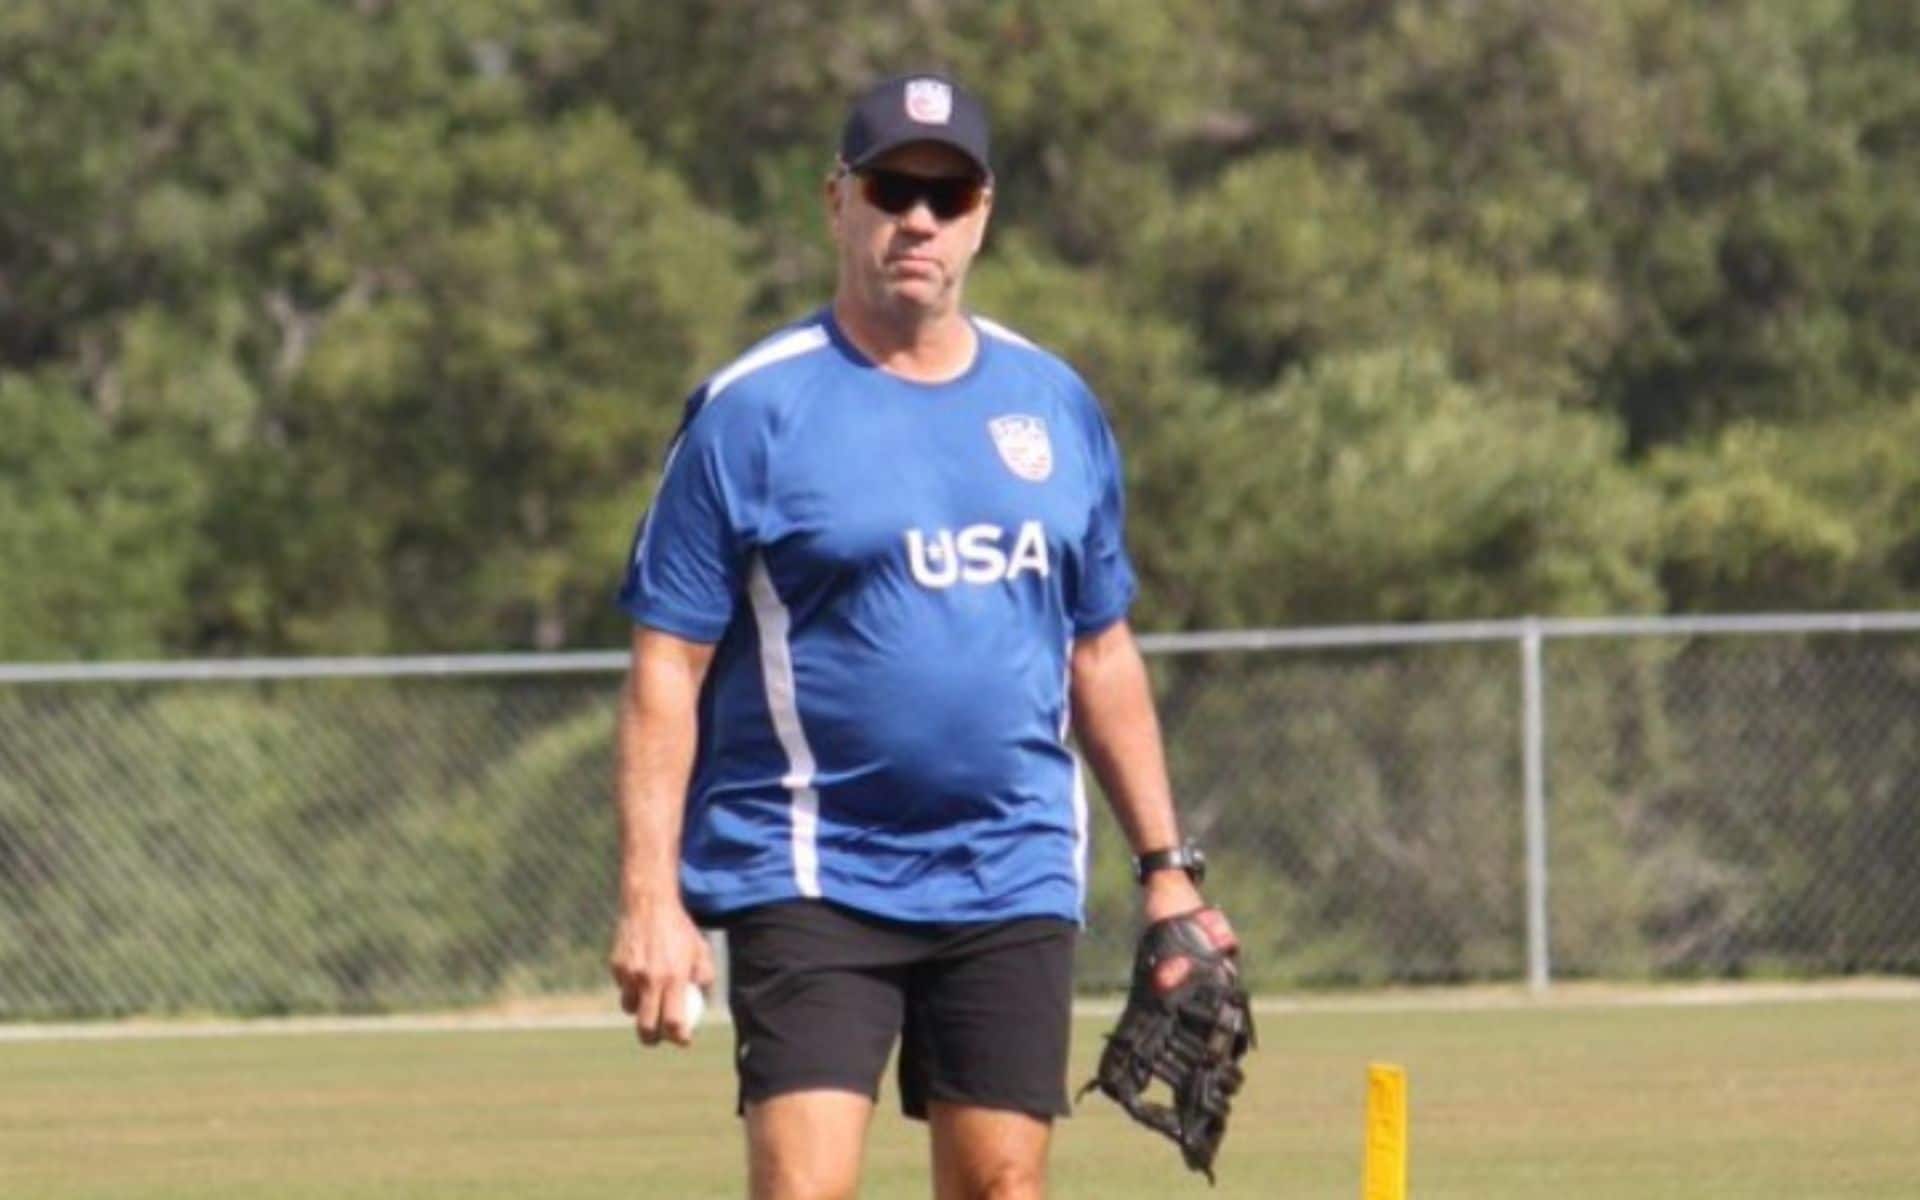 Stuart Law has been recently appointed as USA cricket team's coach (x.com)